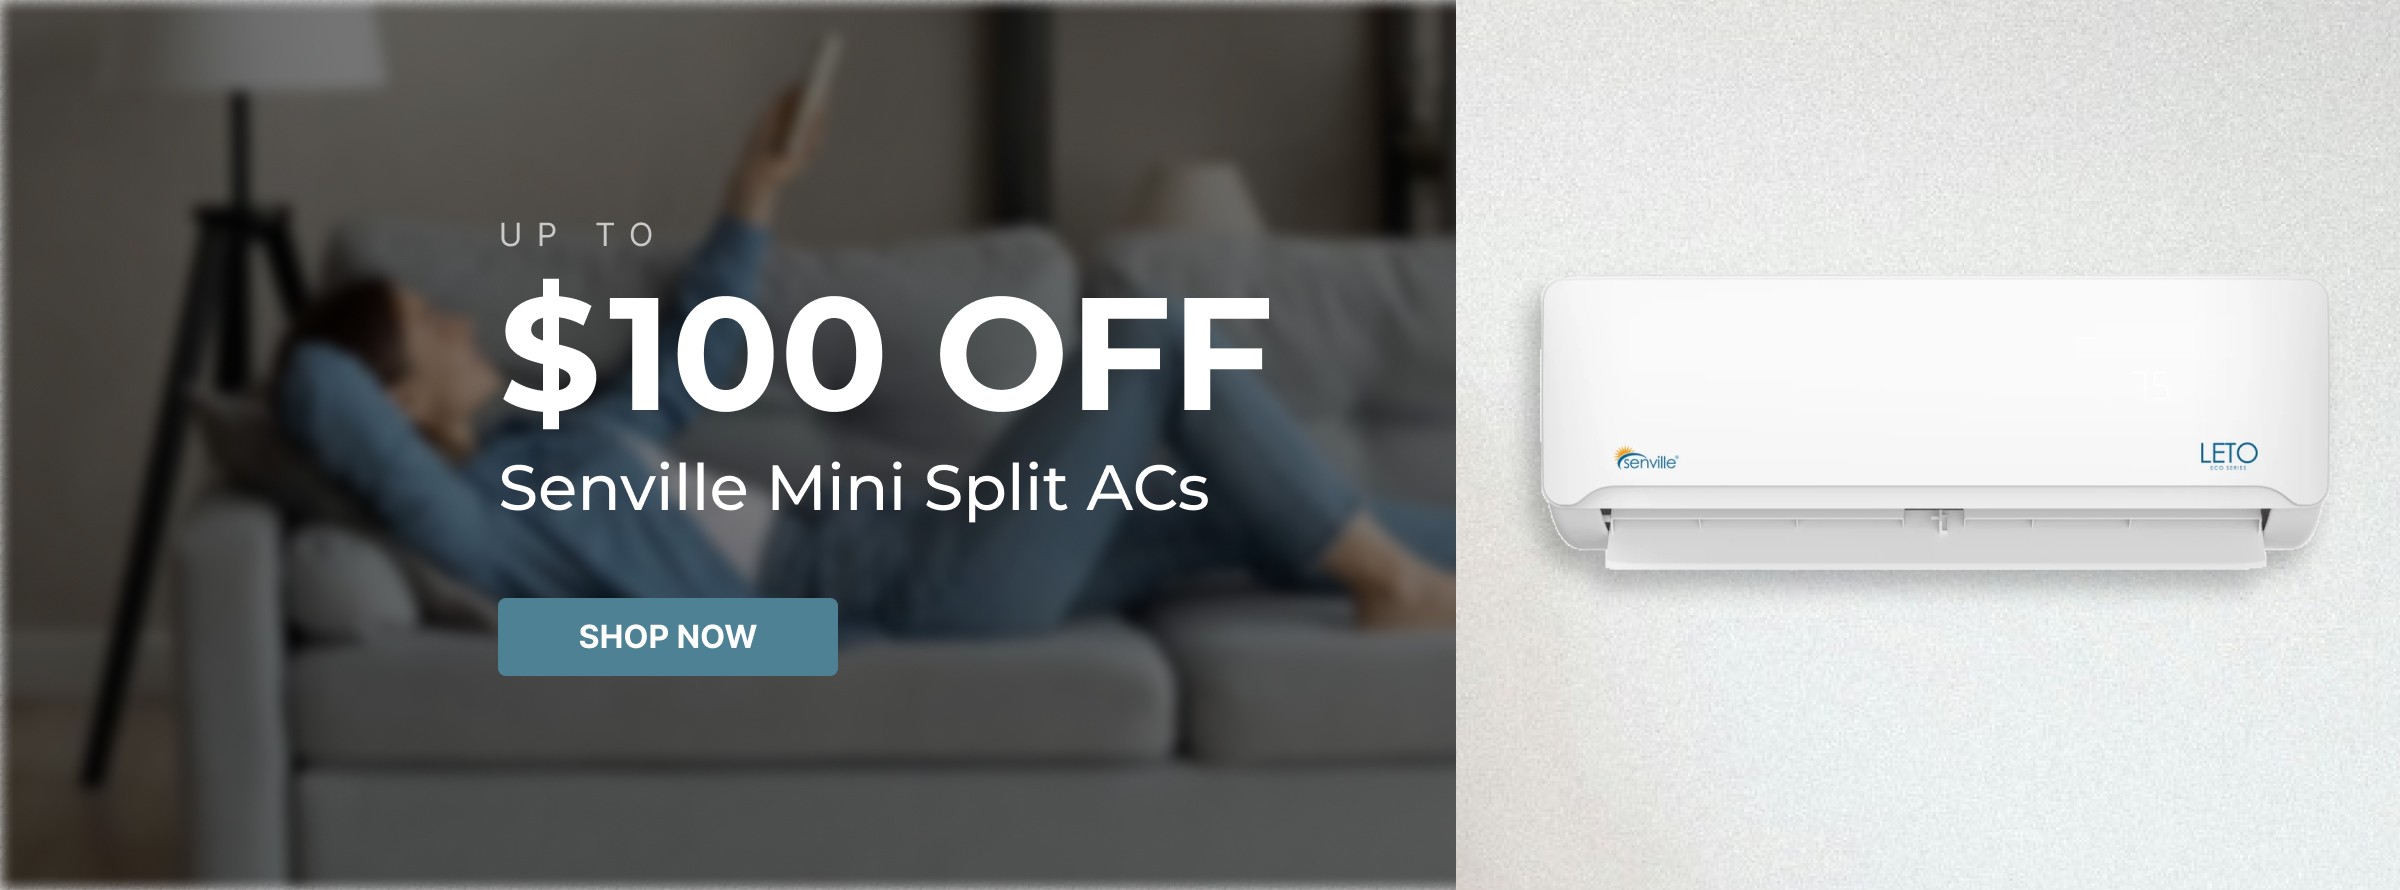 Up to $100 off Senville Mini Split Air Conditioners